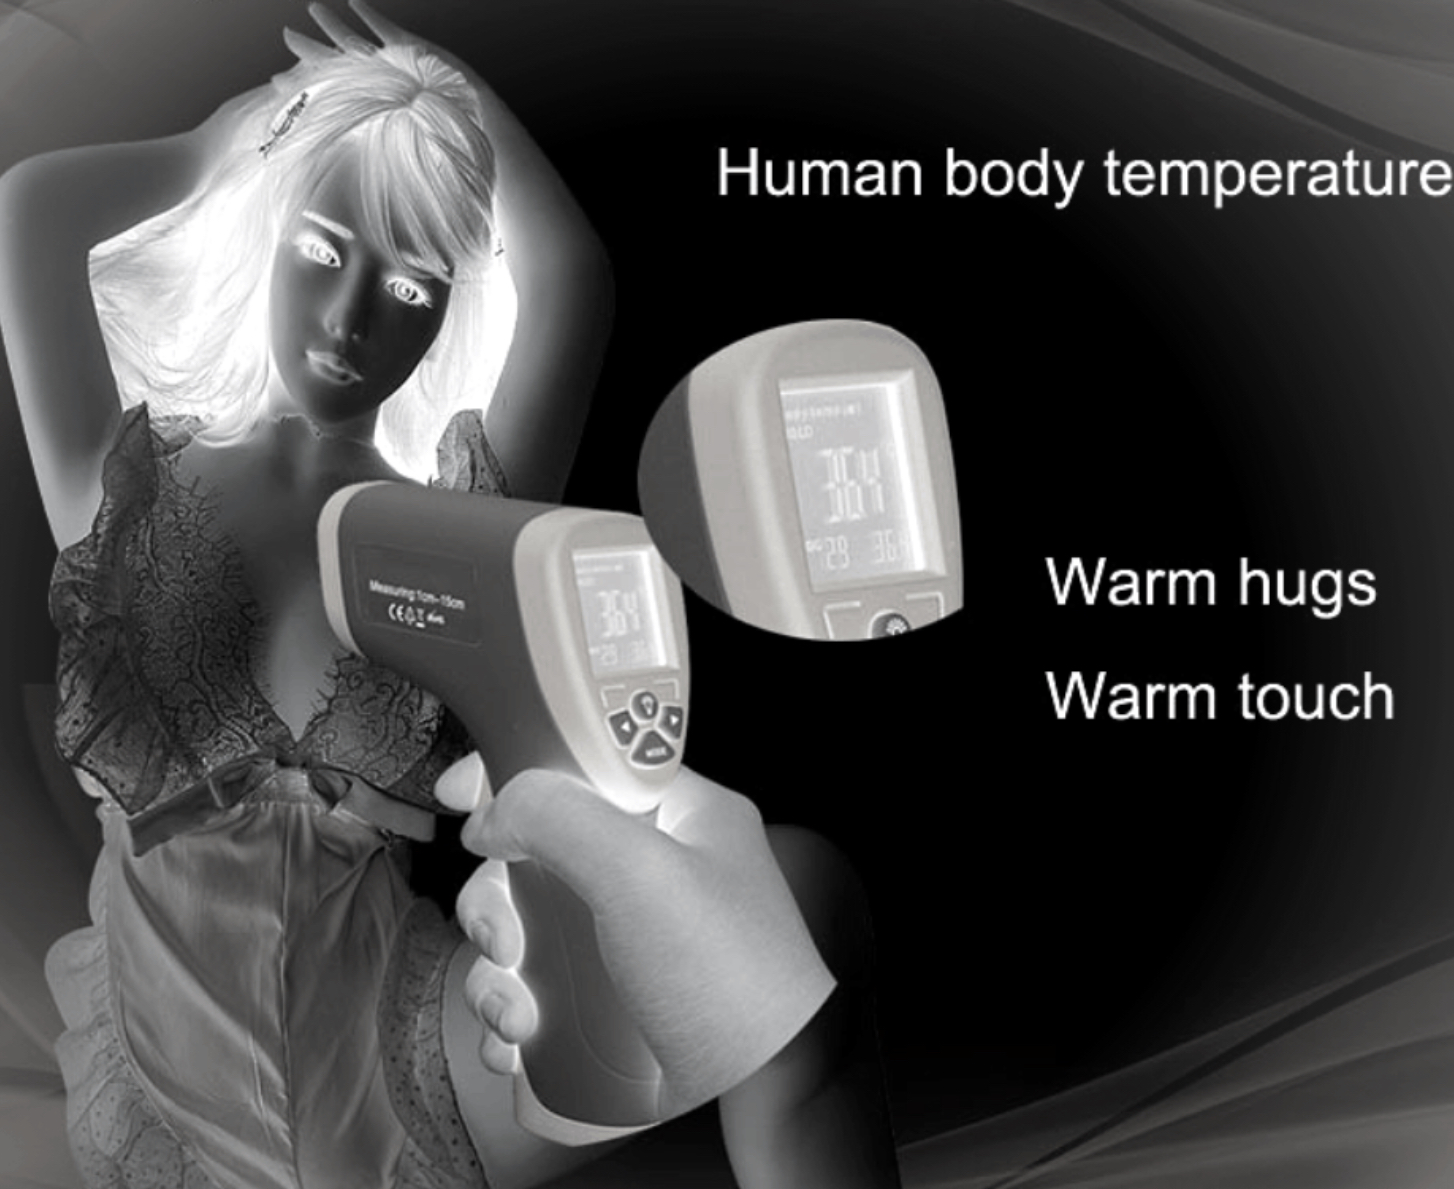 Robots can be Human Body Temperature